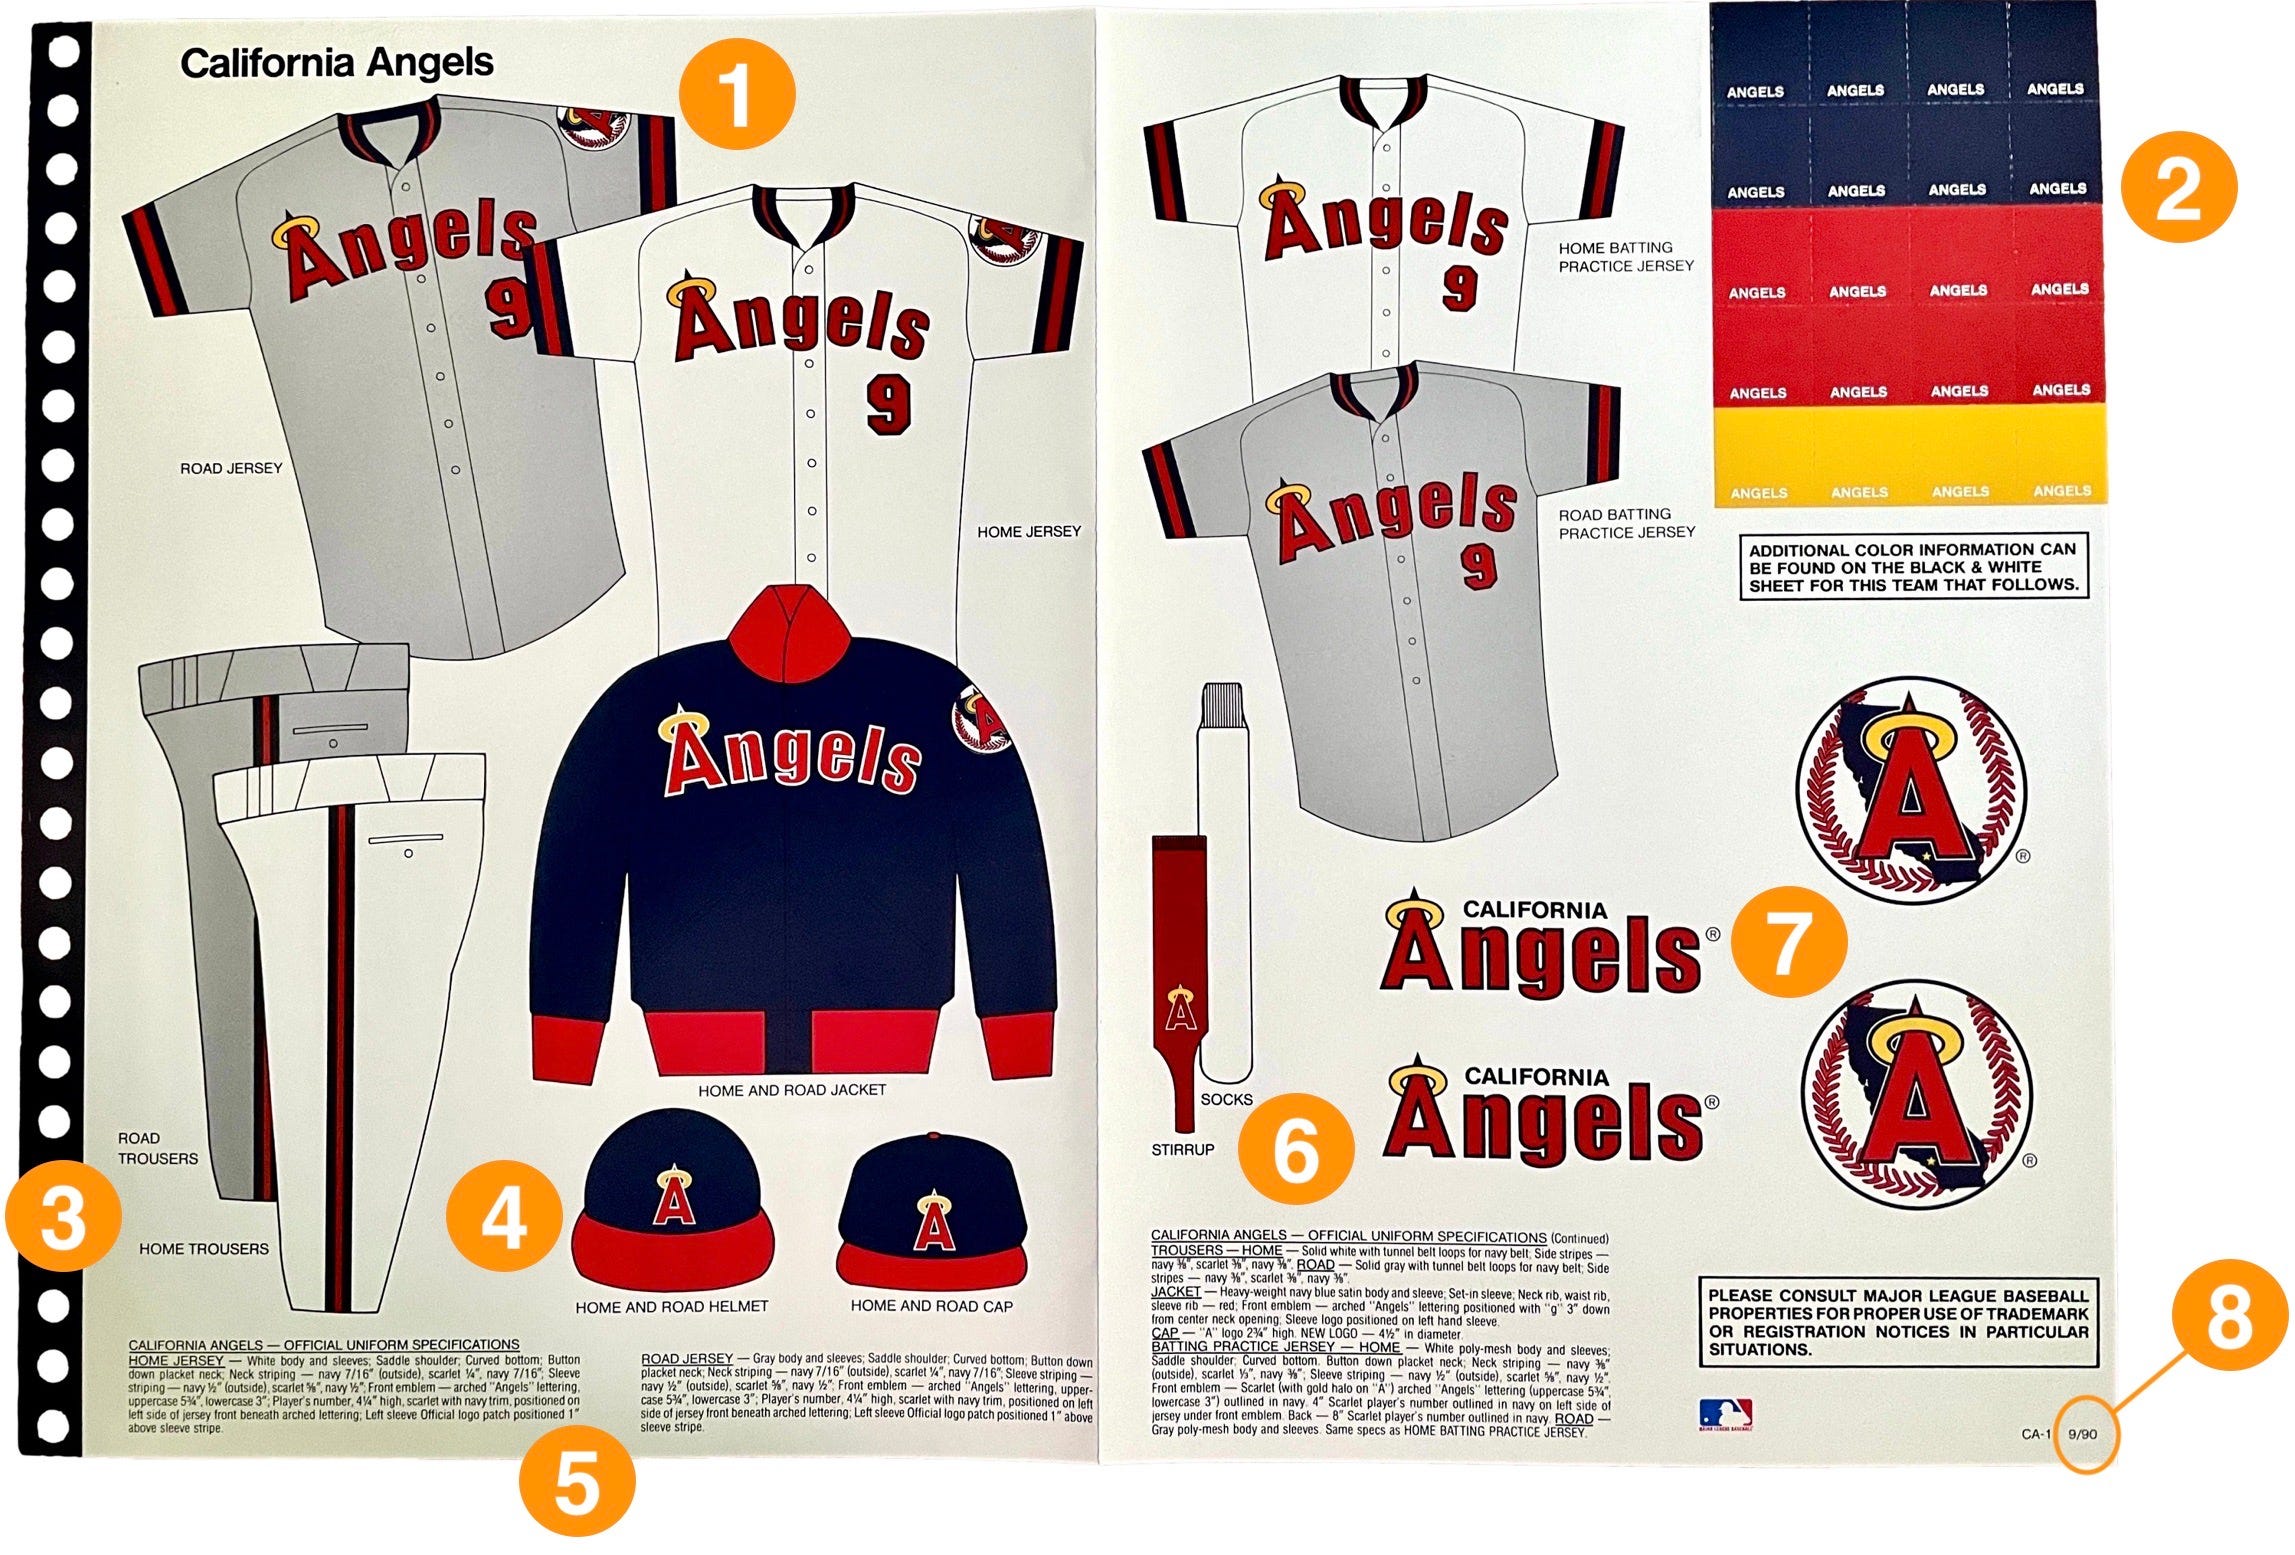 Game Worn Guide to Houston Astros Jerseys (1970-2020) - Game Worn Guides